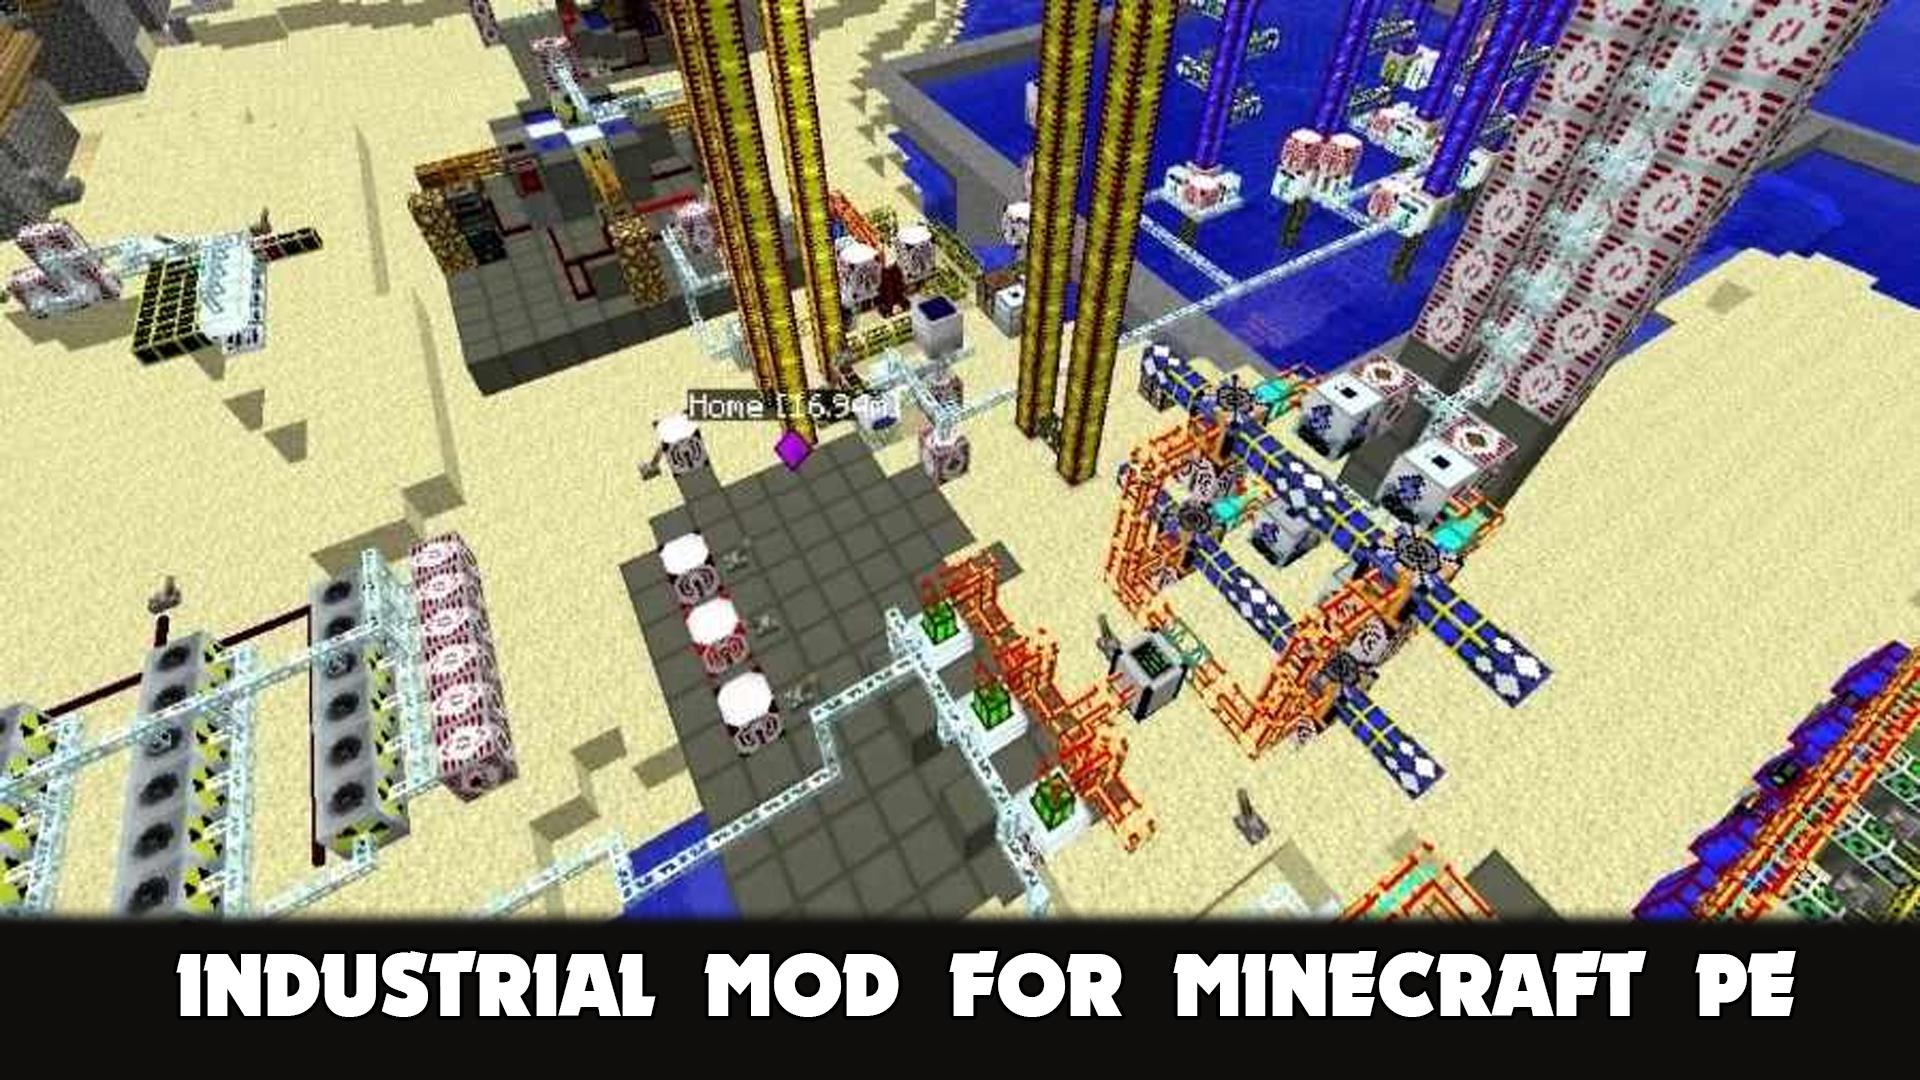 Industry mod for mcpe - Apps on Google Play